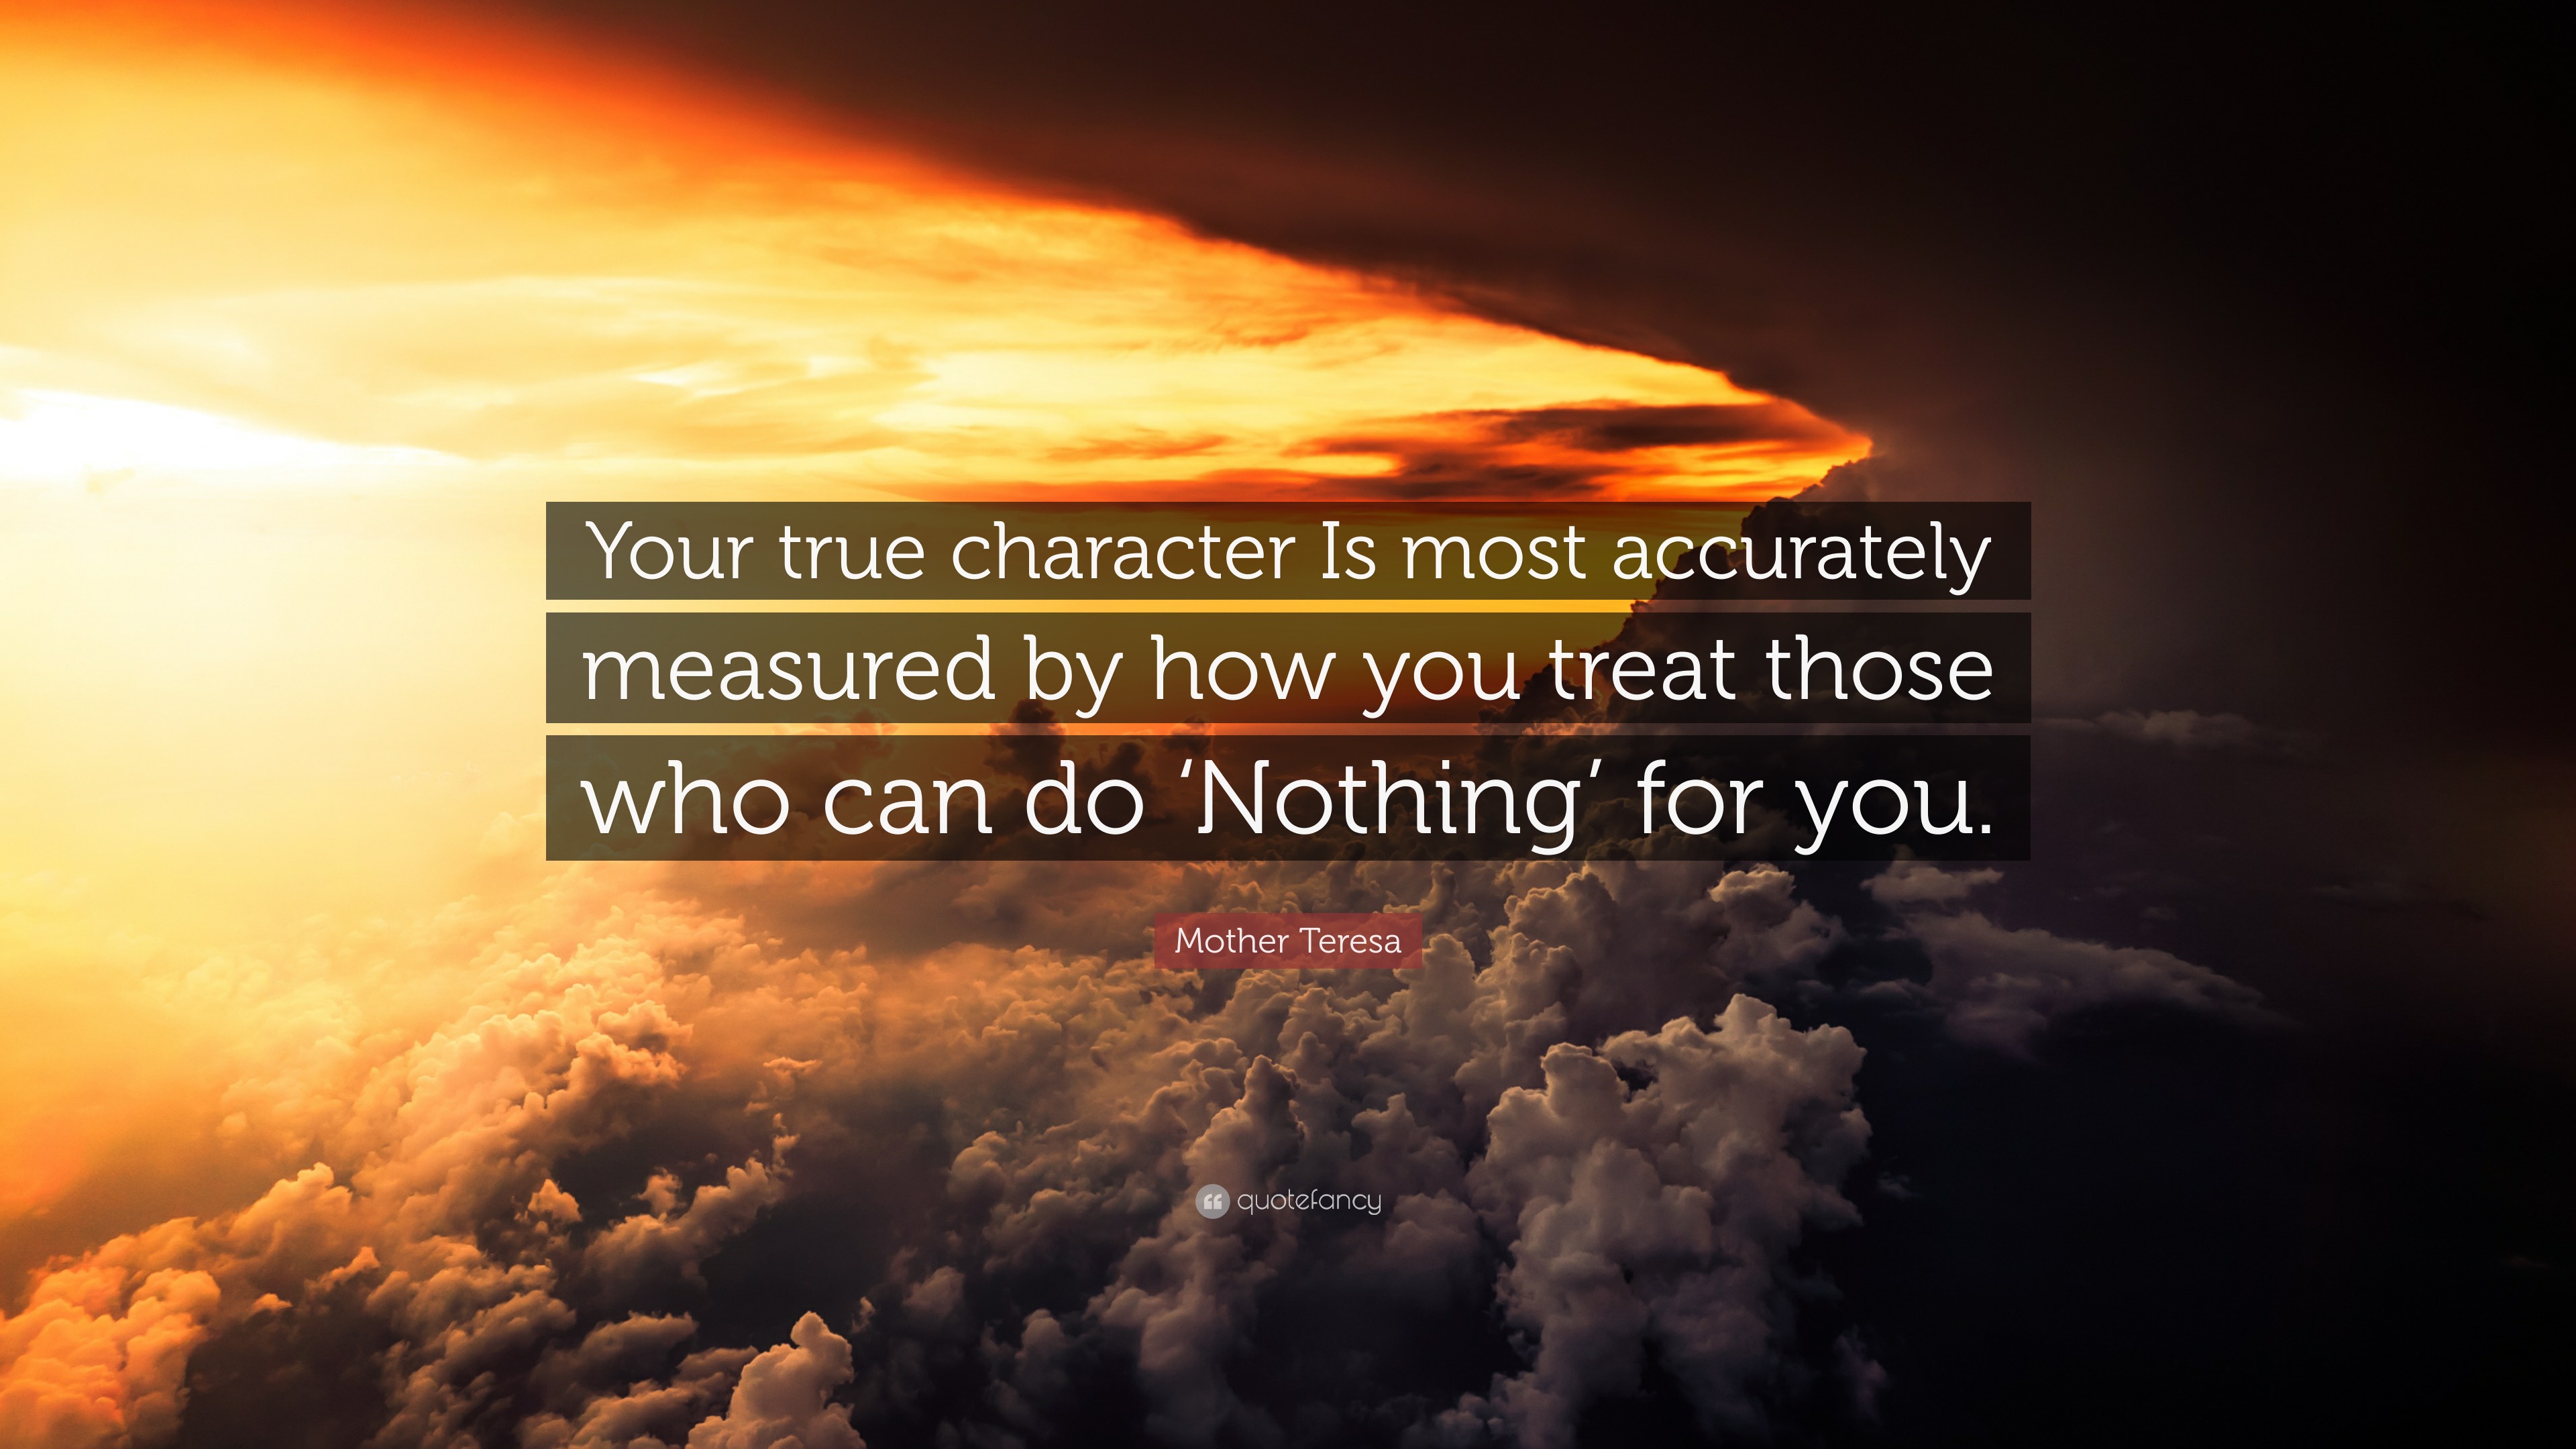 Mother Teresa Quote: “Your true character Is most accurately measured